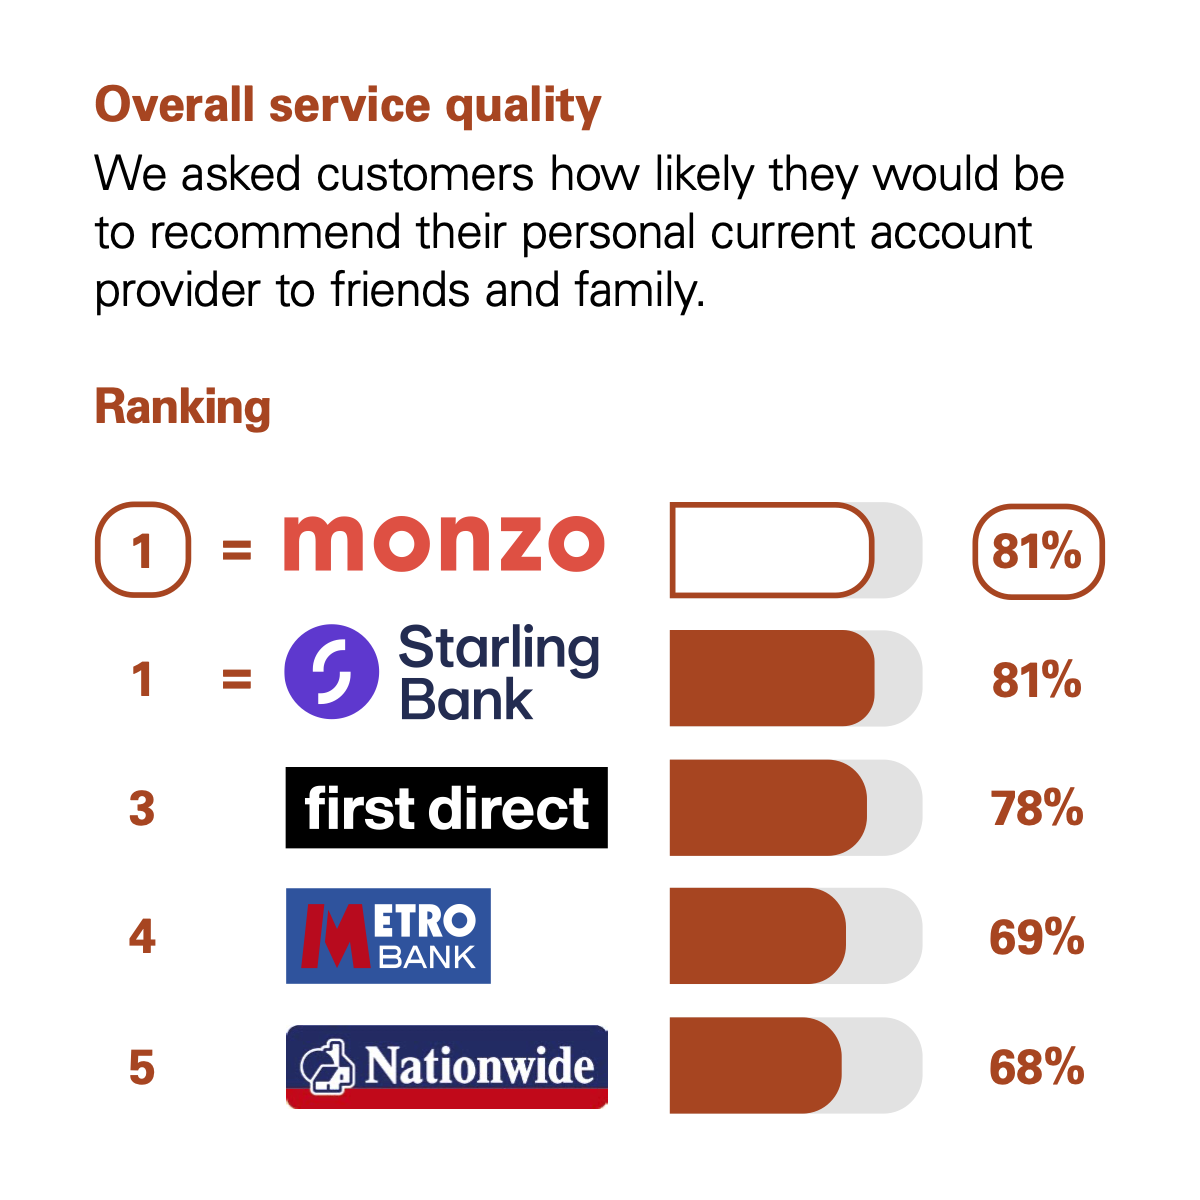 Graph showing the results of the CMA scoring of UK banks in the Overall Service Quality category. The CMA asked customers how likely they would be to recommend their personal current account provider to friends and family. The rankings with percentage scores are: Joint 1st are Monzo and Starling Bank with 81%. 3rd First Direct with 78%. 4th Metro Bank with 69%. 5th Nationwide with 68%.